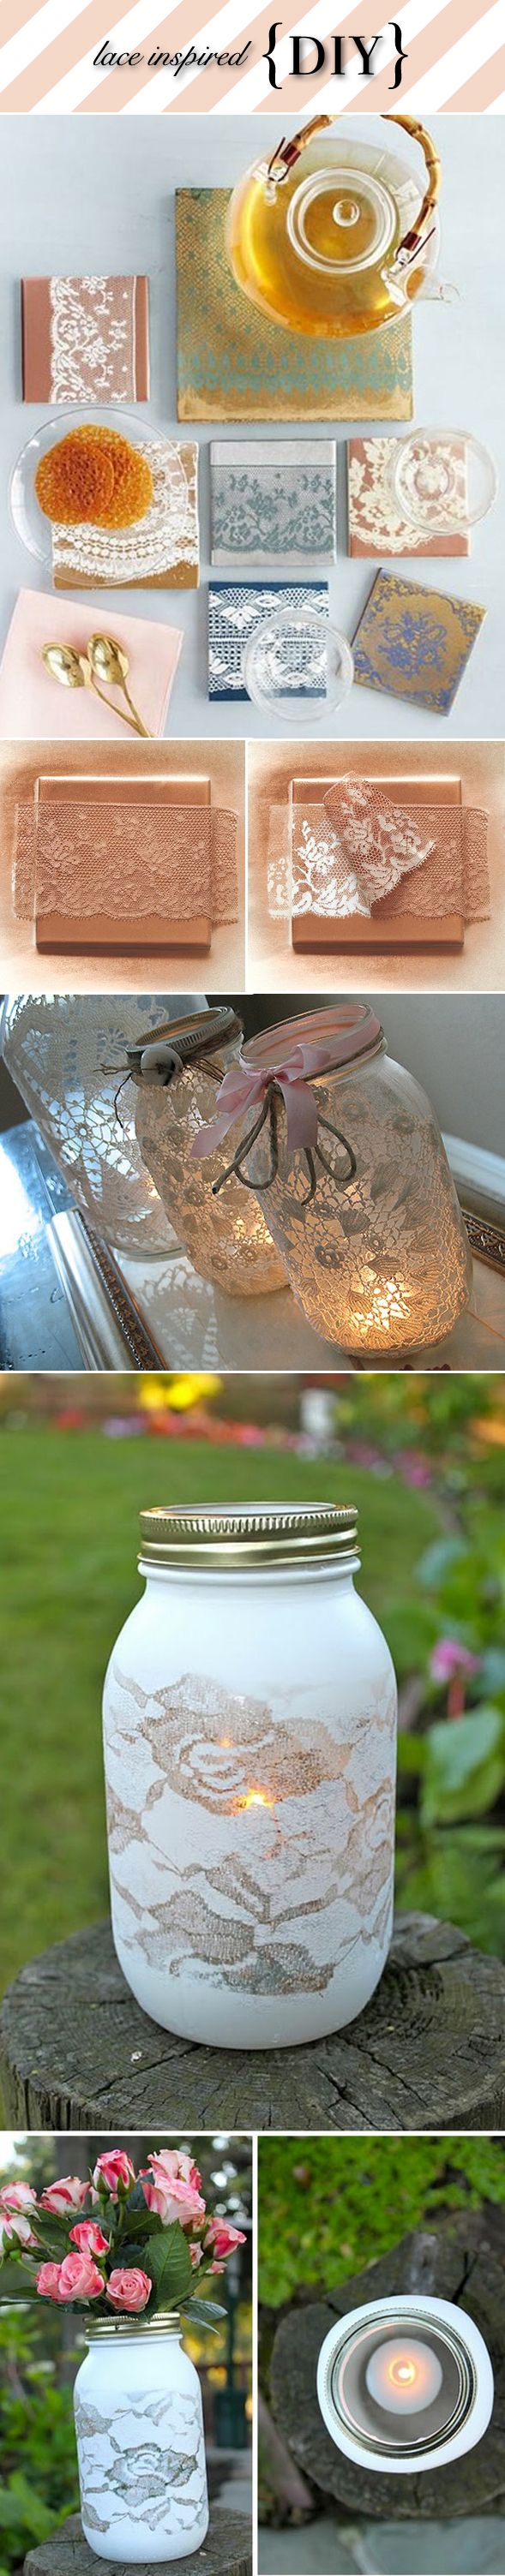 Lace Inspired DIY Projects